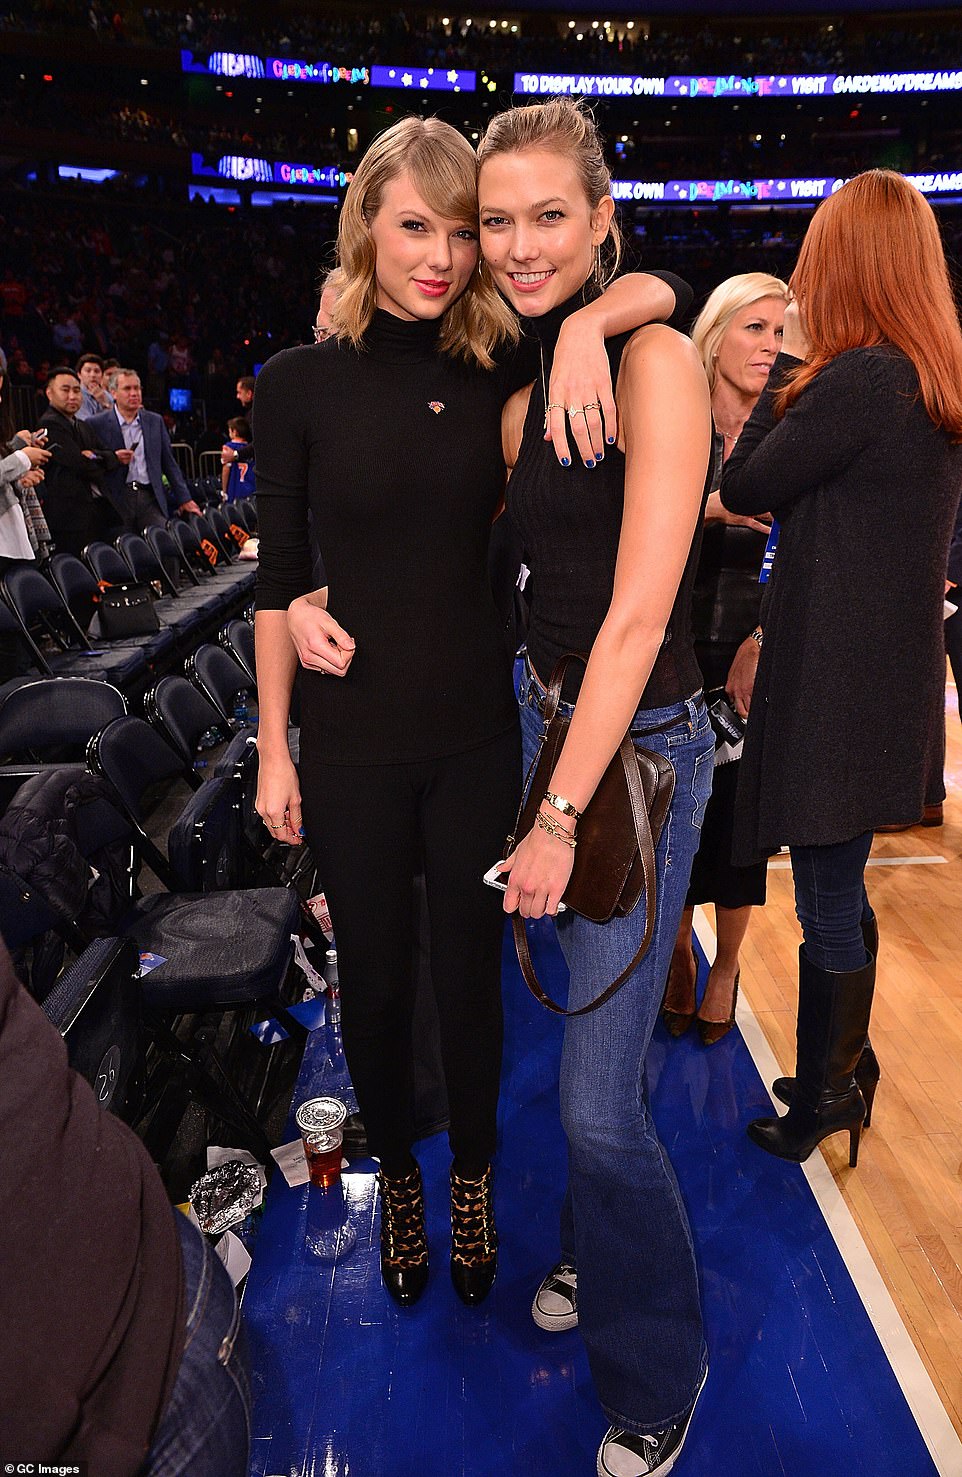 Karlie Kloss spotted at Taylor Swift's show years after dating rumors